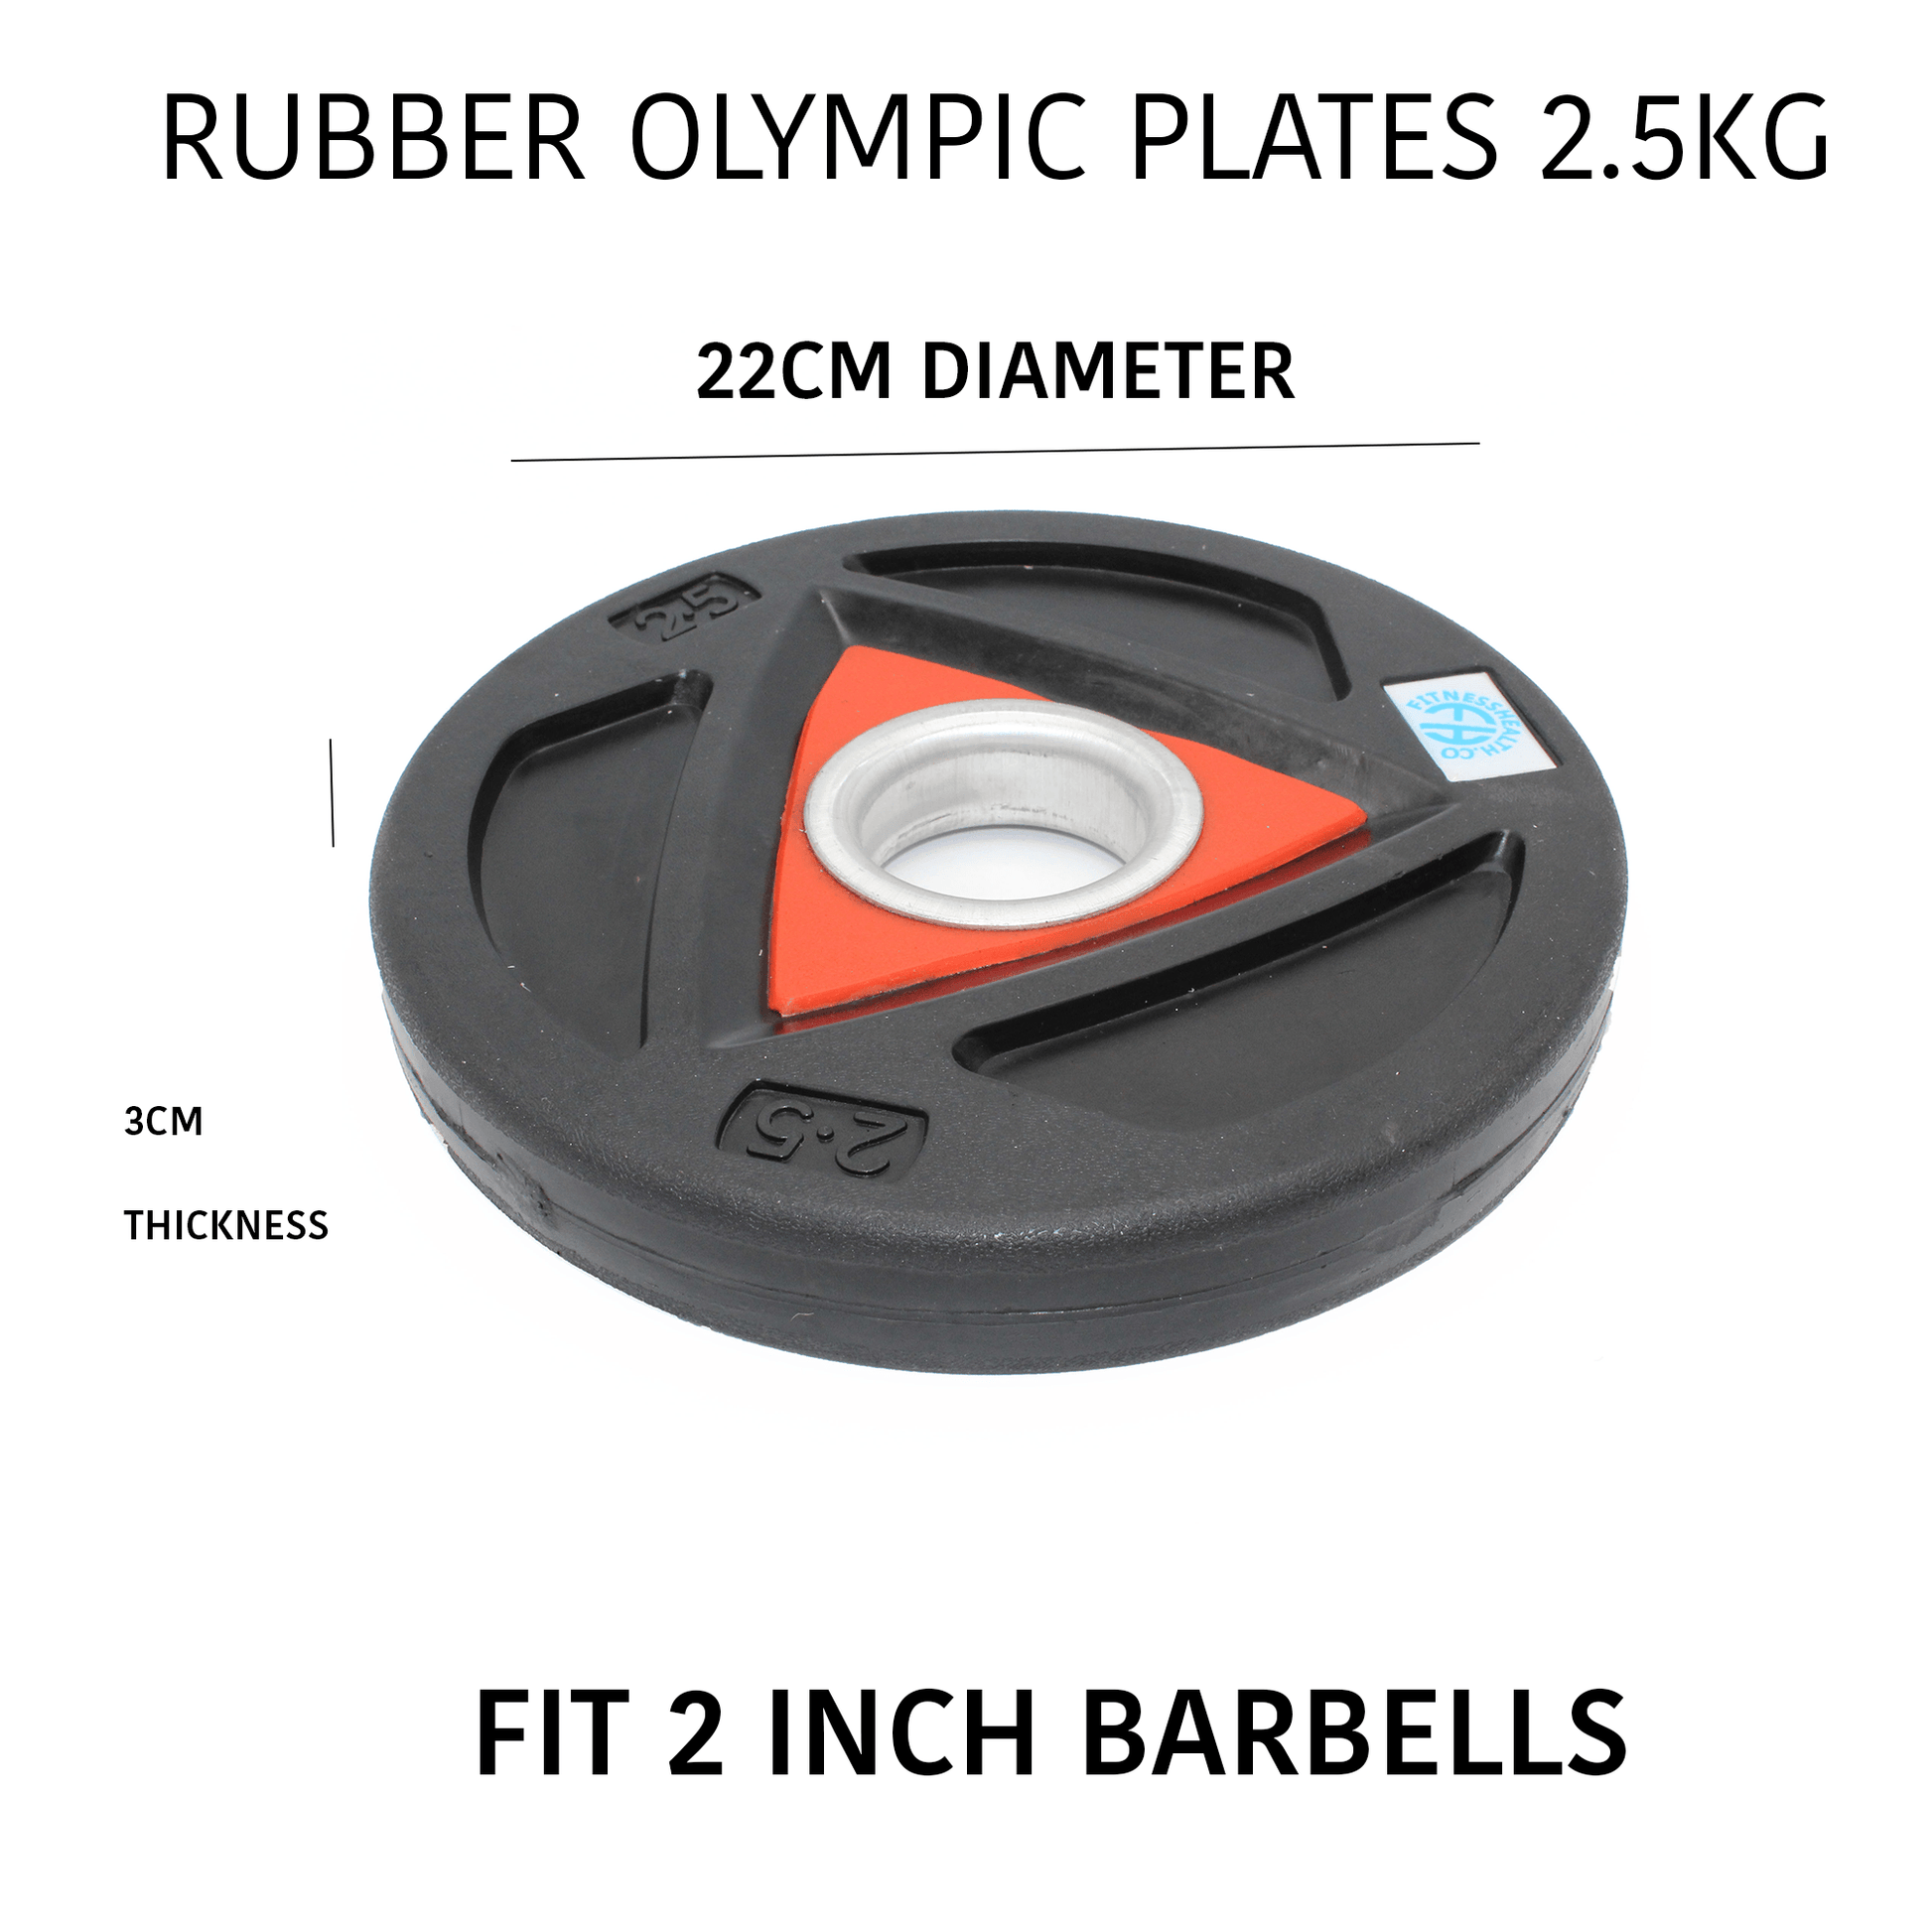 Olympic Rubber Weight 2.5kg Plates - 2 pcs Set - Fitness Health 